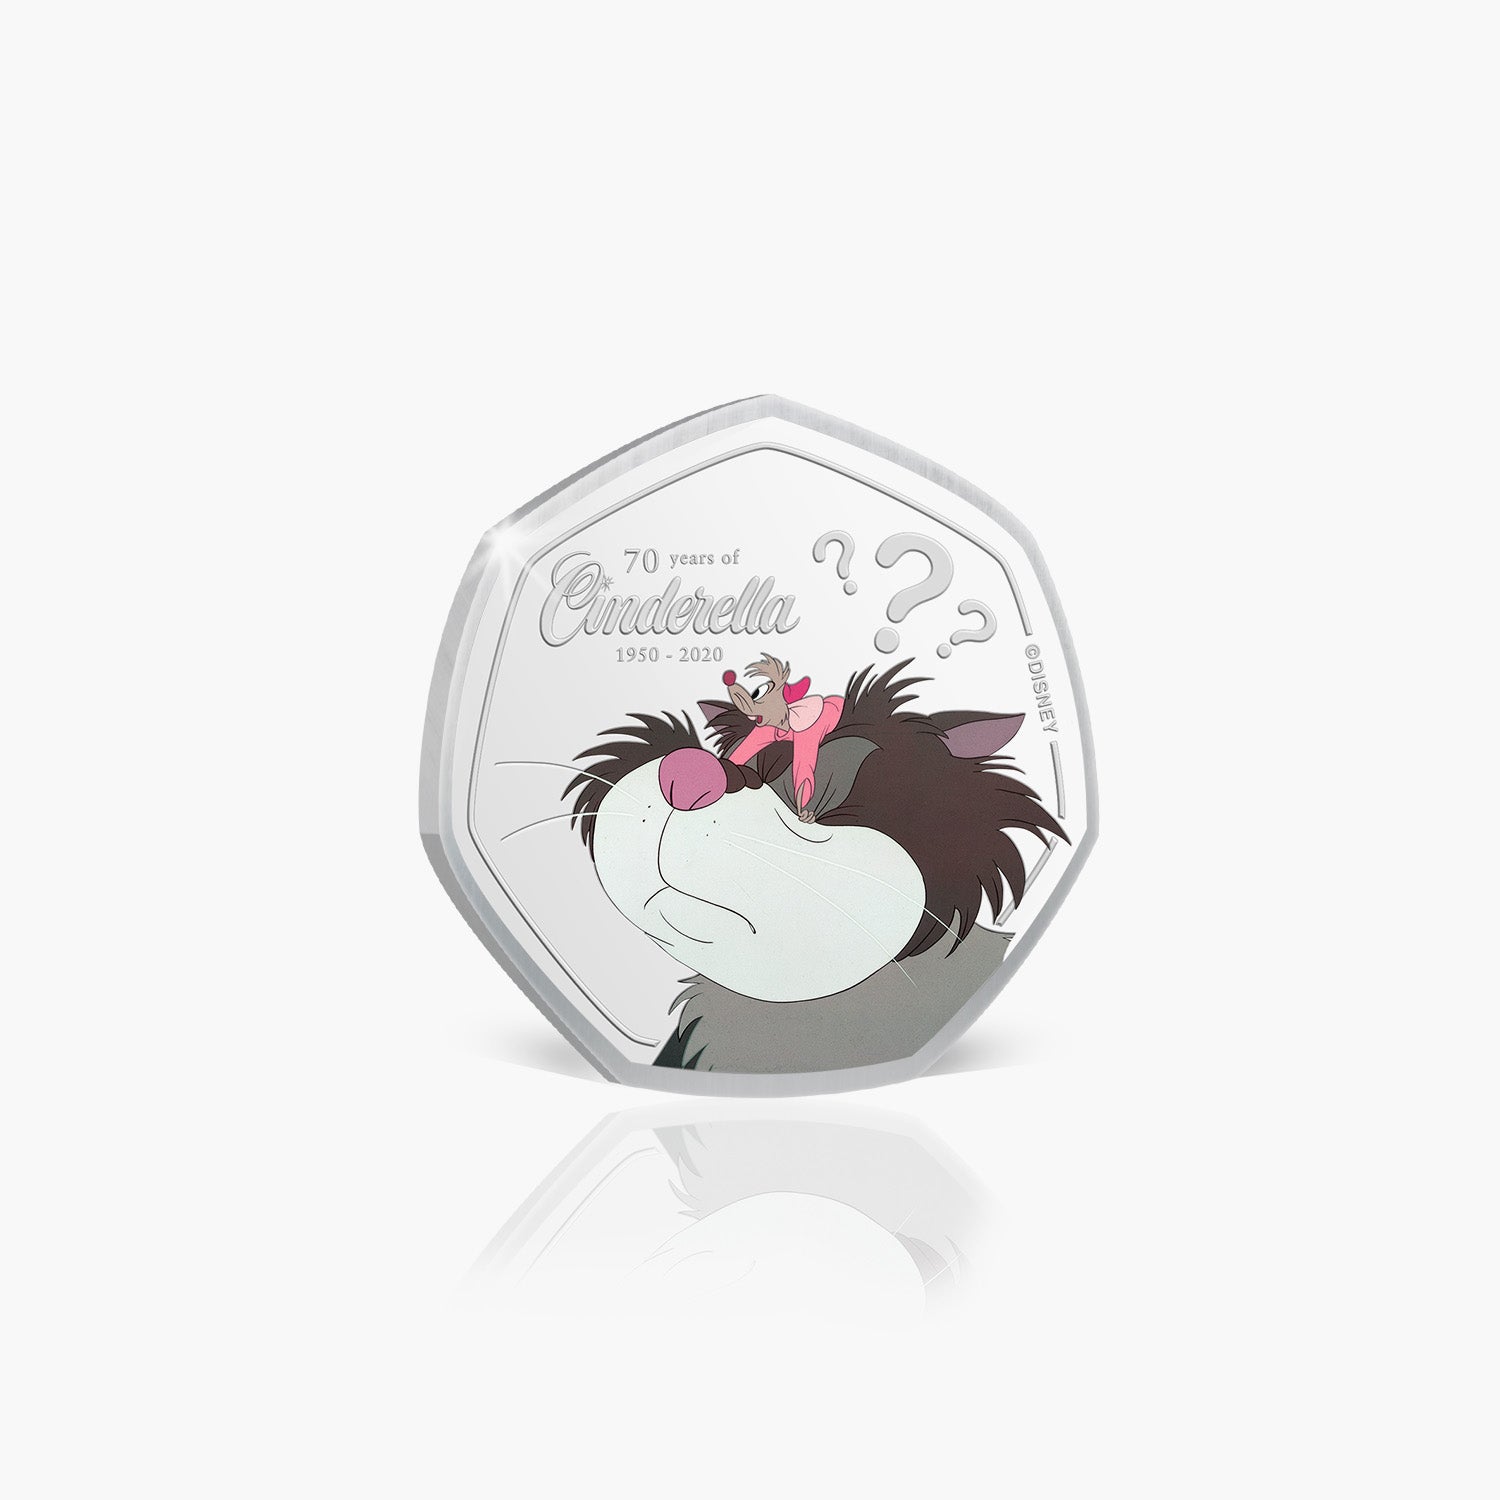 Jaq Silver Plated Coin